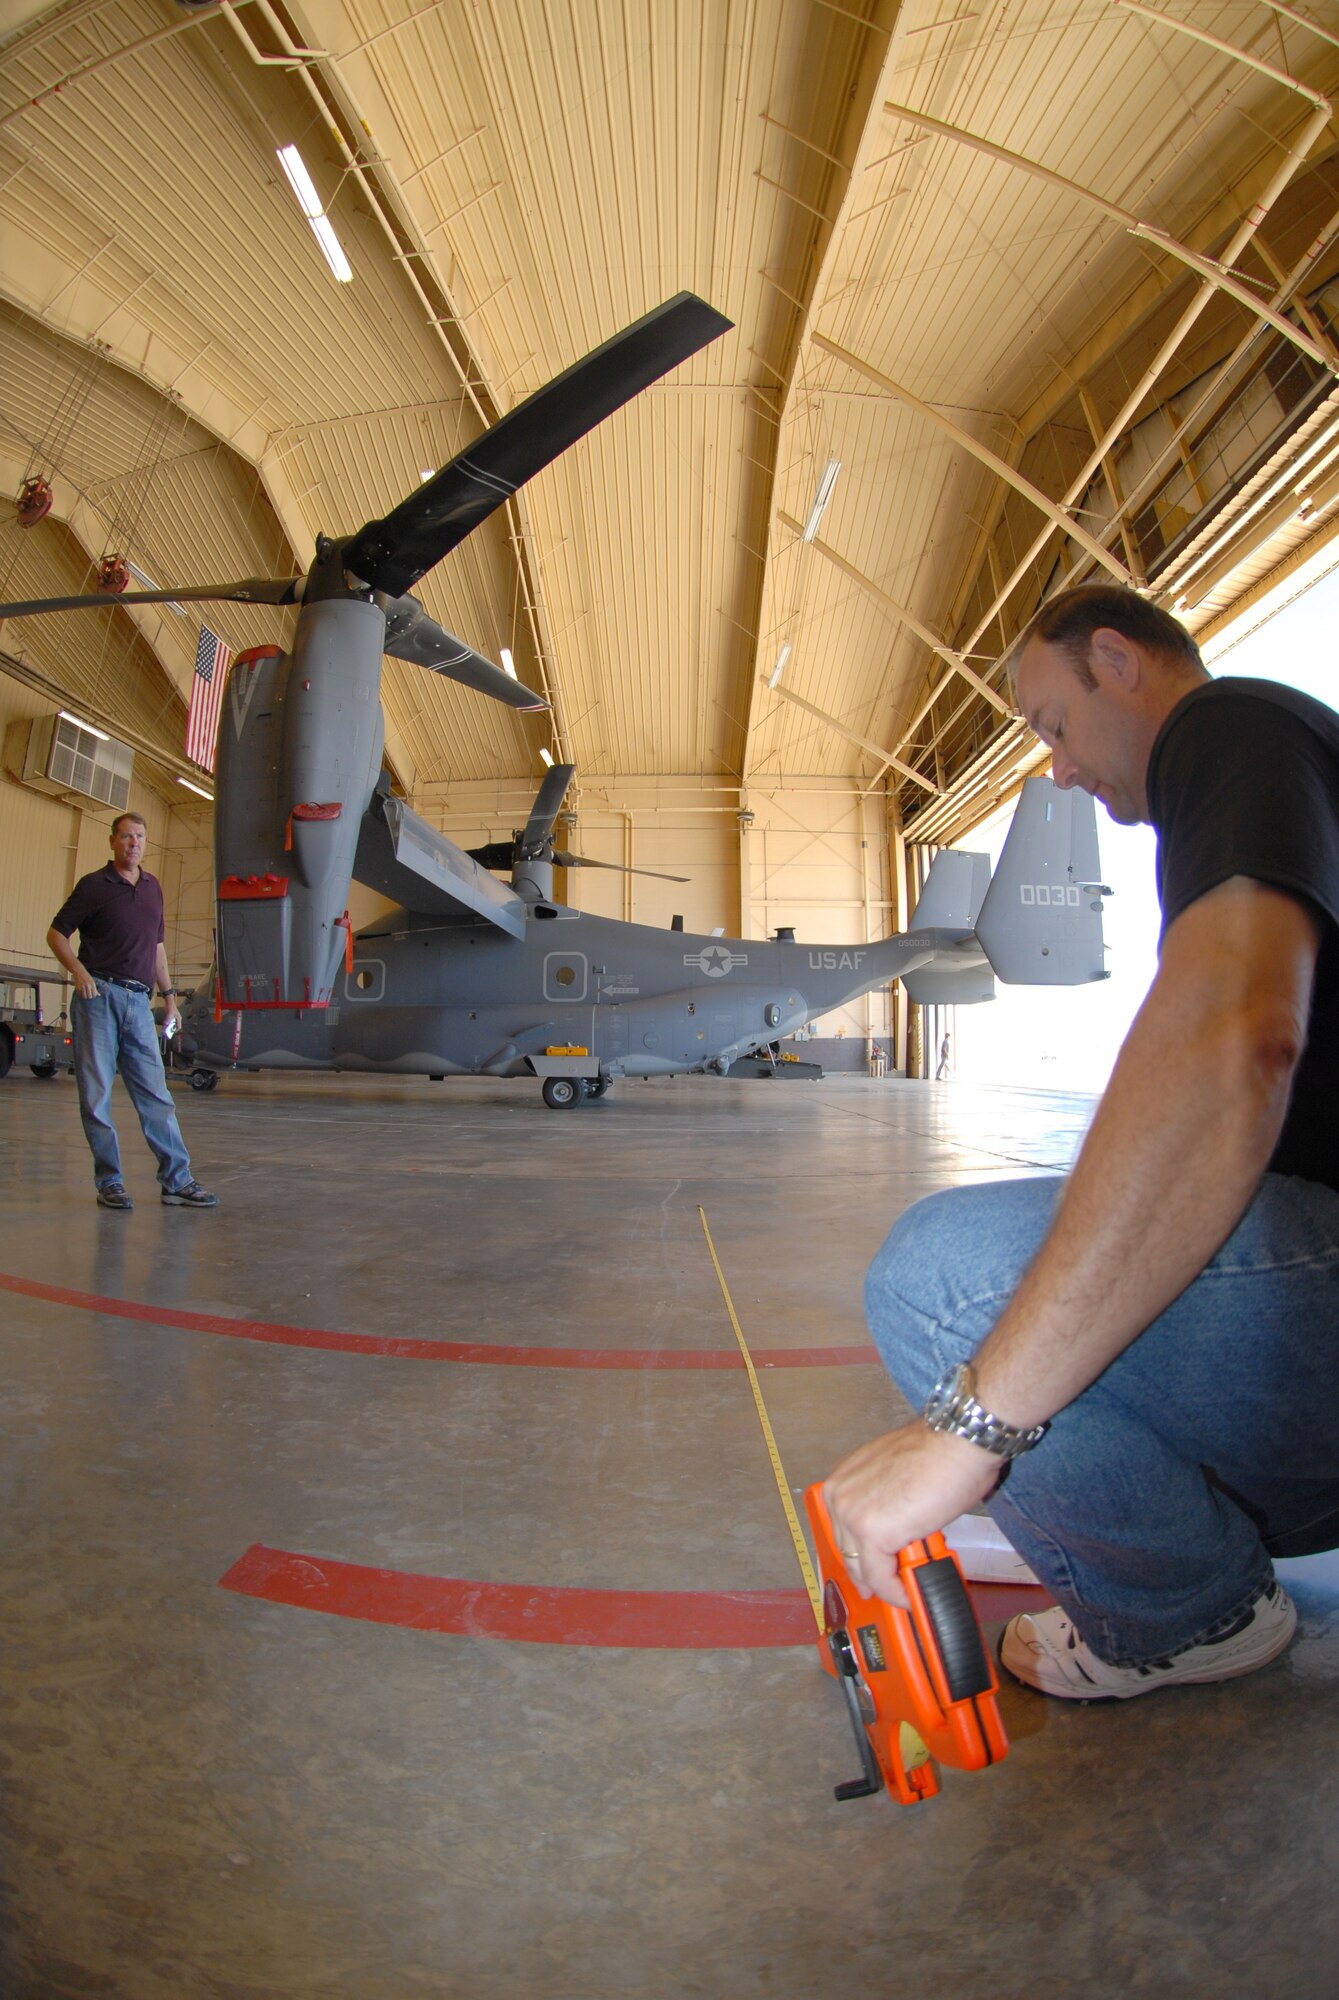 CANNON AIR FORCE BASE, N.M. -- David Lee, left, and Todd Richardson take measurements in a hangar at Cannon Air Force Base, N.M., during tests to determine the suitability of the base?s hangars to support the CV-22 Osprey.   The men, who provide contract support for the CV-22 program, work for the Boeing Corp. at Ft. Walton Beach, Fla.  Cannon AFB will be transferred from Air Combat Command to Air Force Special Operations Command on Oct. 1.  Ospreys are among the special operations aircraft to be assigned to the 27th Special Operations Wing at Cannon.  The wing, formerly designated the 27th Fighter Wing, operated F-16 Fighting Falcons at the base from 1995 to 2007.  (Air Force photo by Chief Master Sgt. Gary Emery)